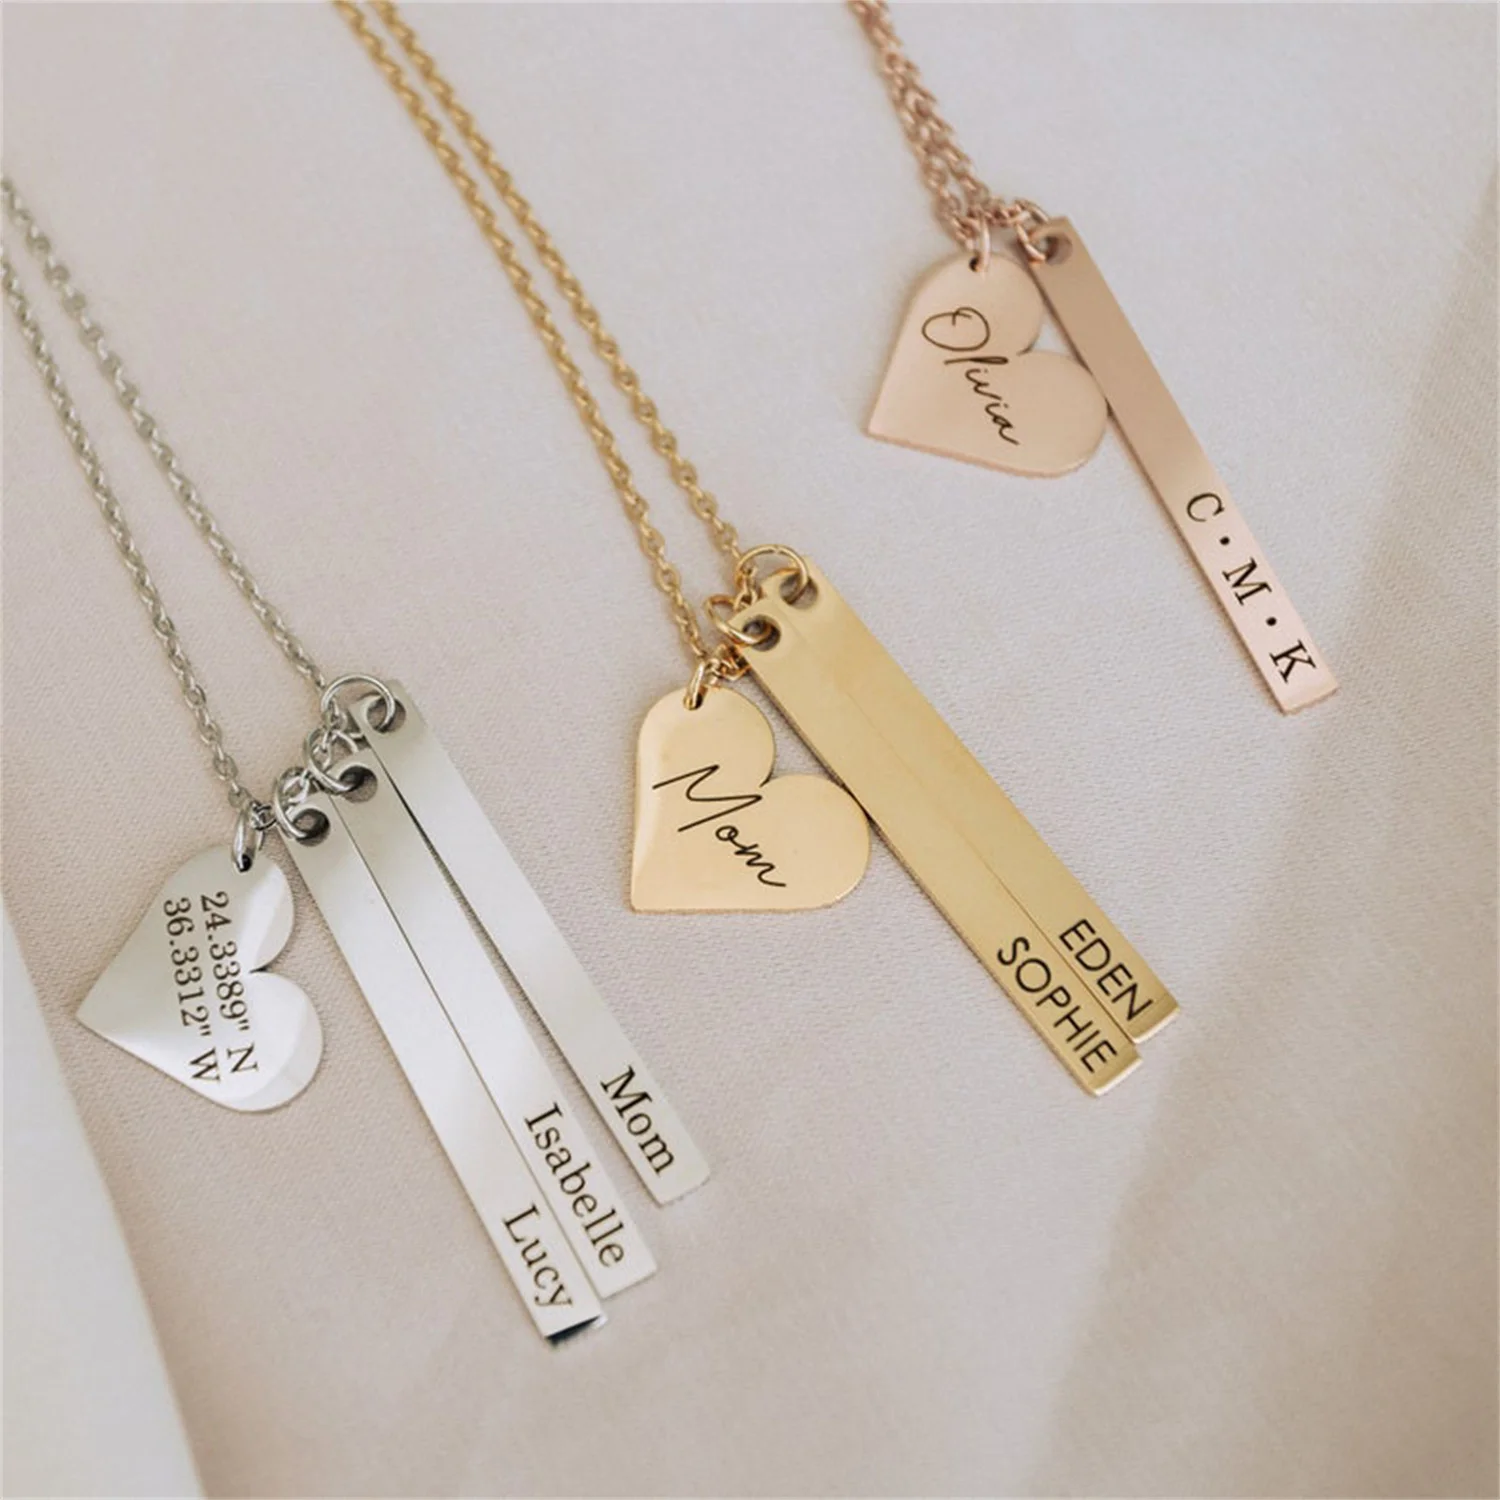 Personalized Engraved Name Bar Necklace Custom Heart Gold Charm Pendant Stainless Steel Jewelry Exquisite Gift For Family Friend custom photo projection necklace stainless steel chain heart flower start pendant diy picture inside couple family necklace